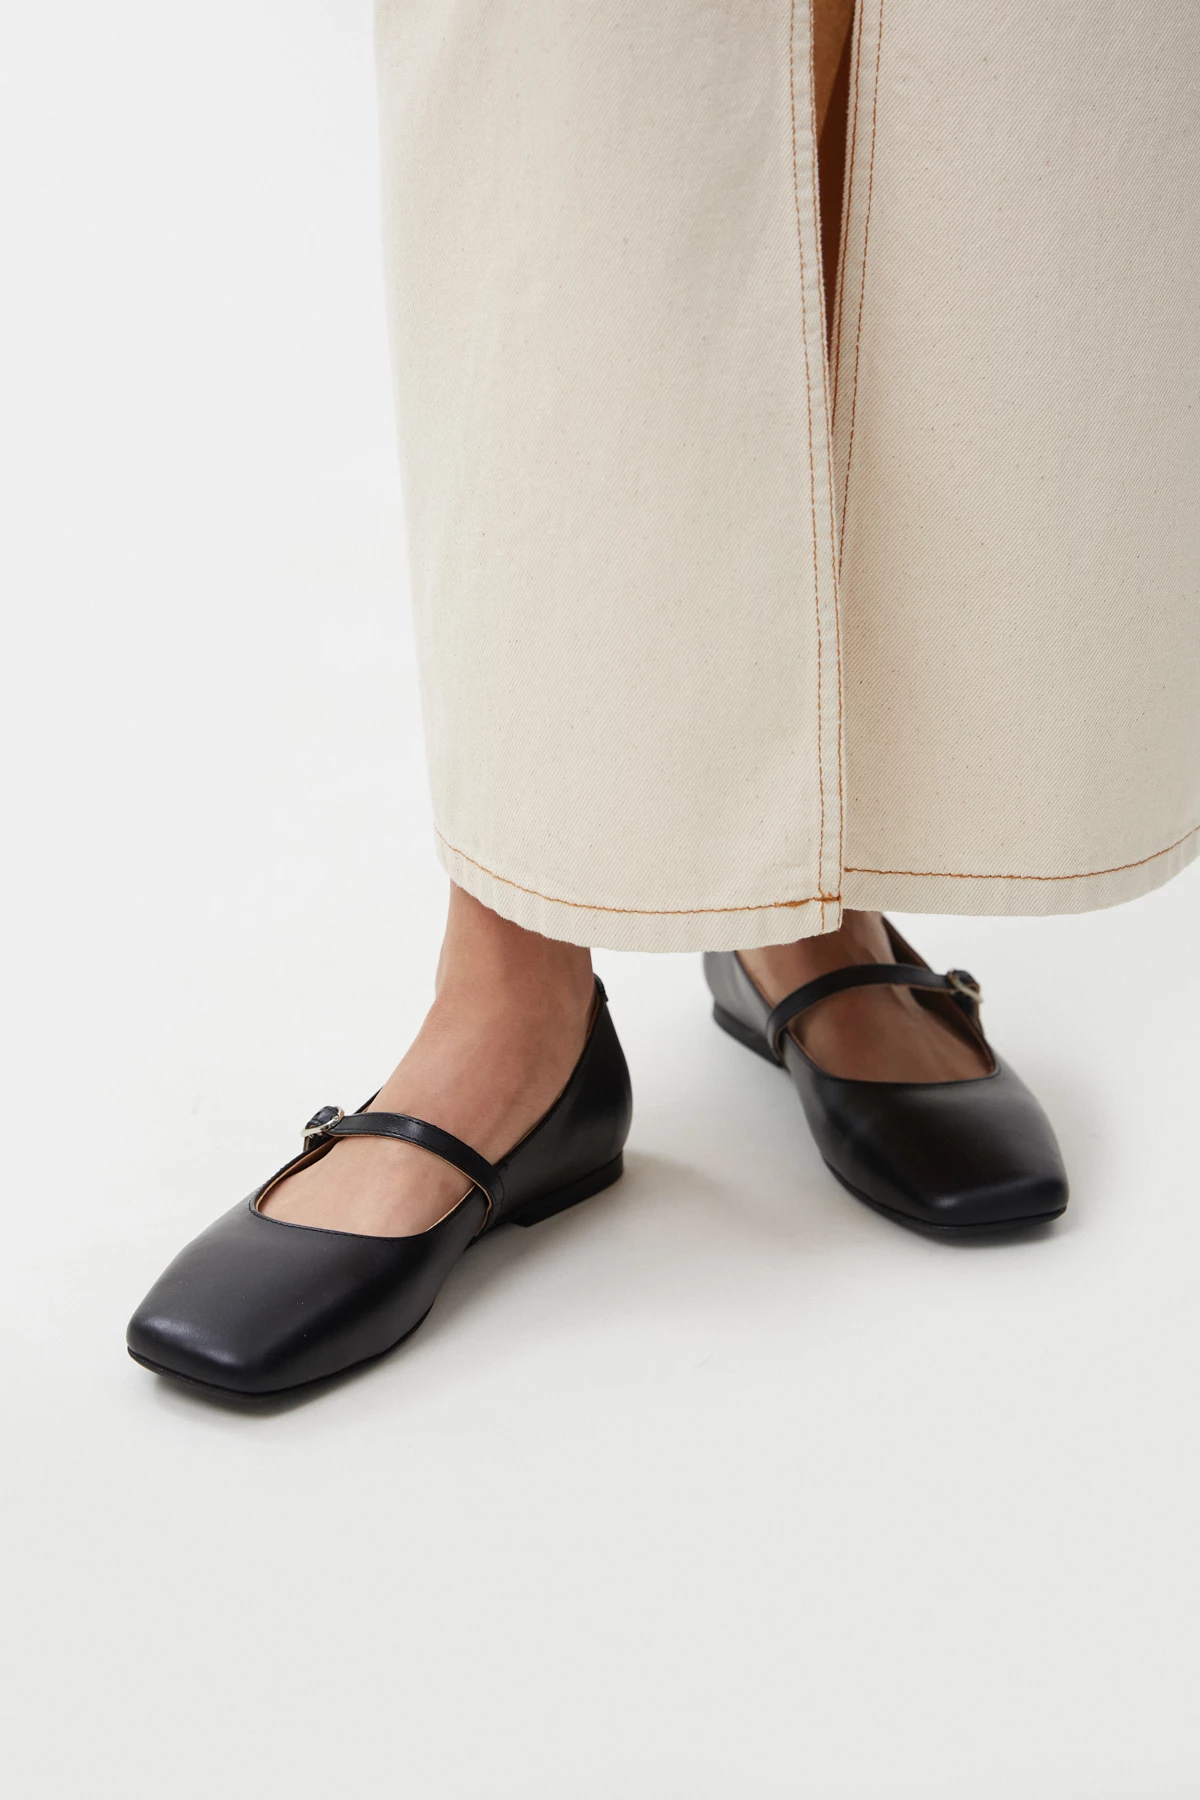 Black Mary Jane ballet flats made of genuine leather, photo 5